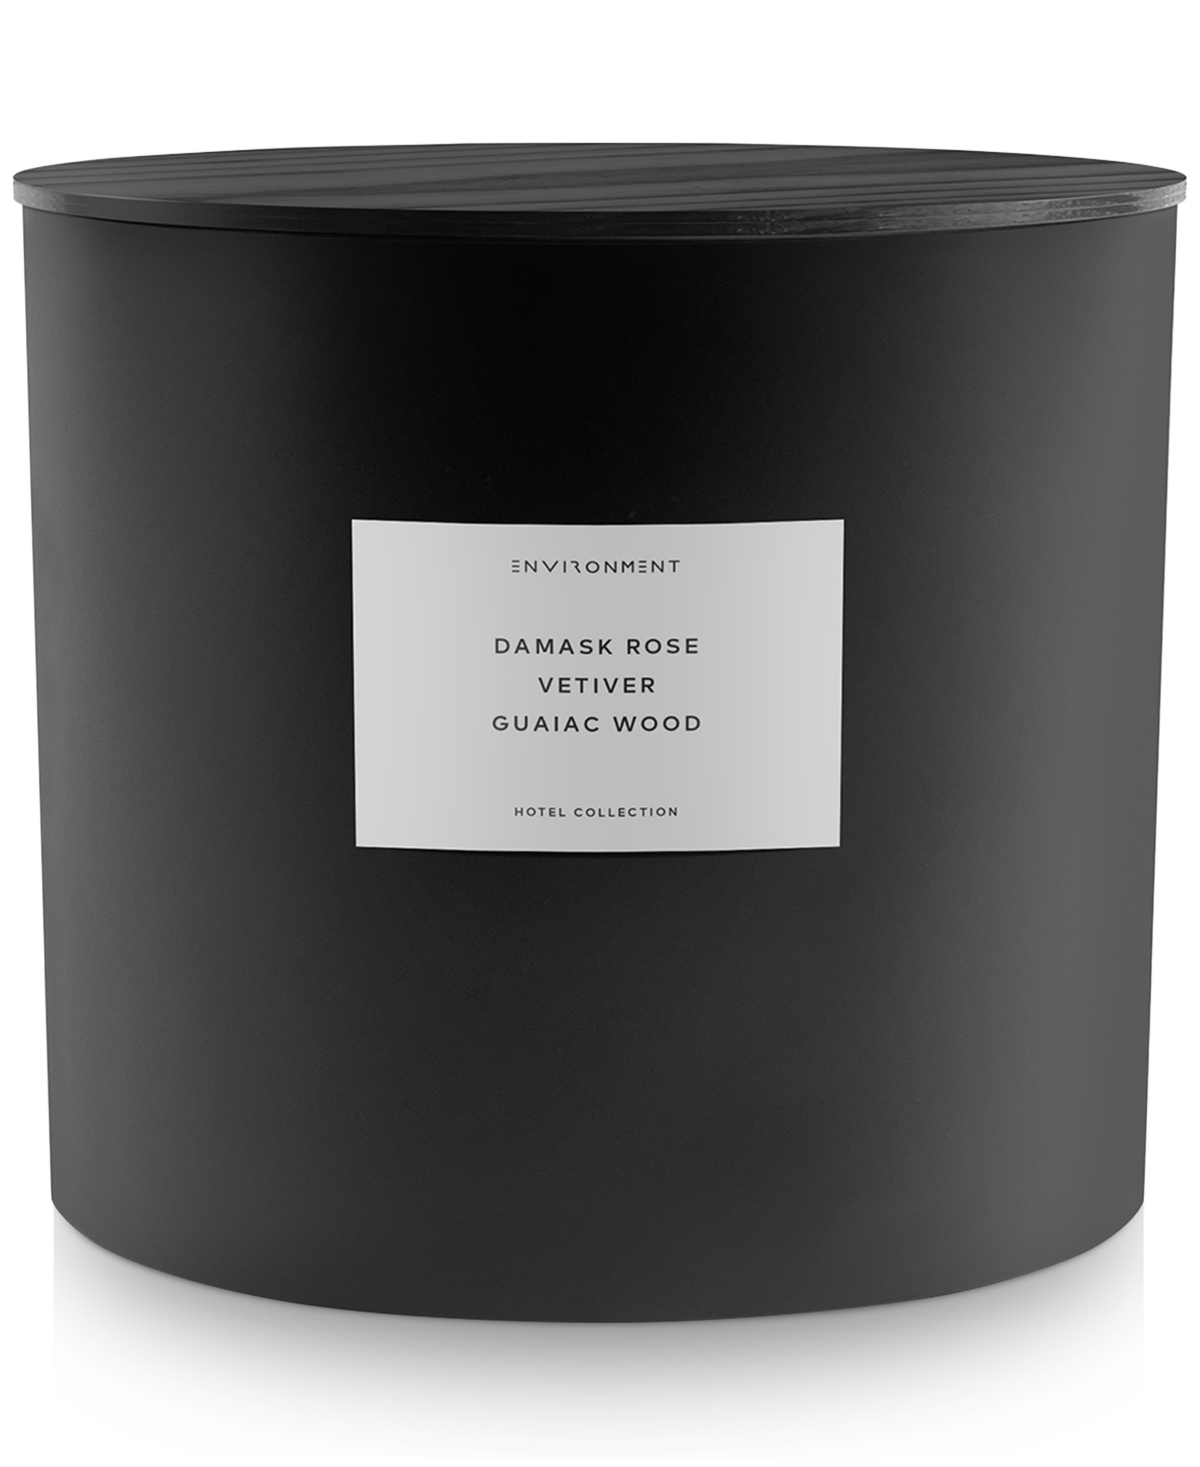 Damask Rose, Vetiver & Guaiac Wood Candle (Inspired by 5-Star Hotels), 55 oz.